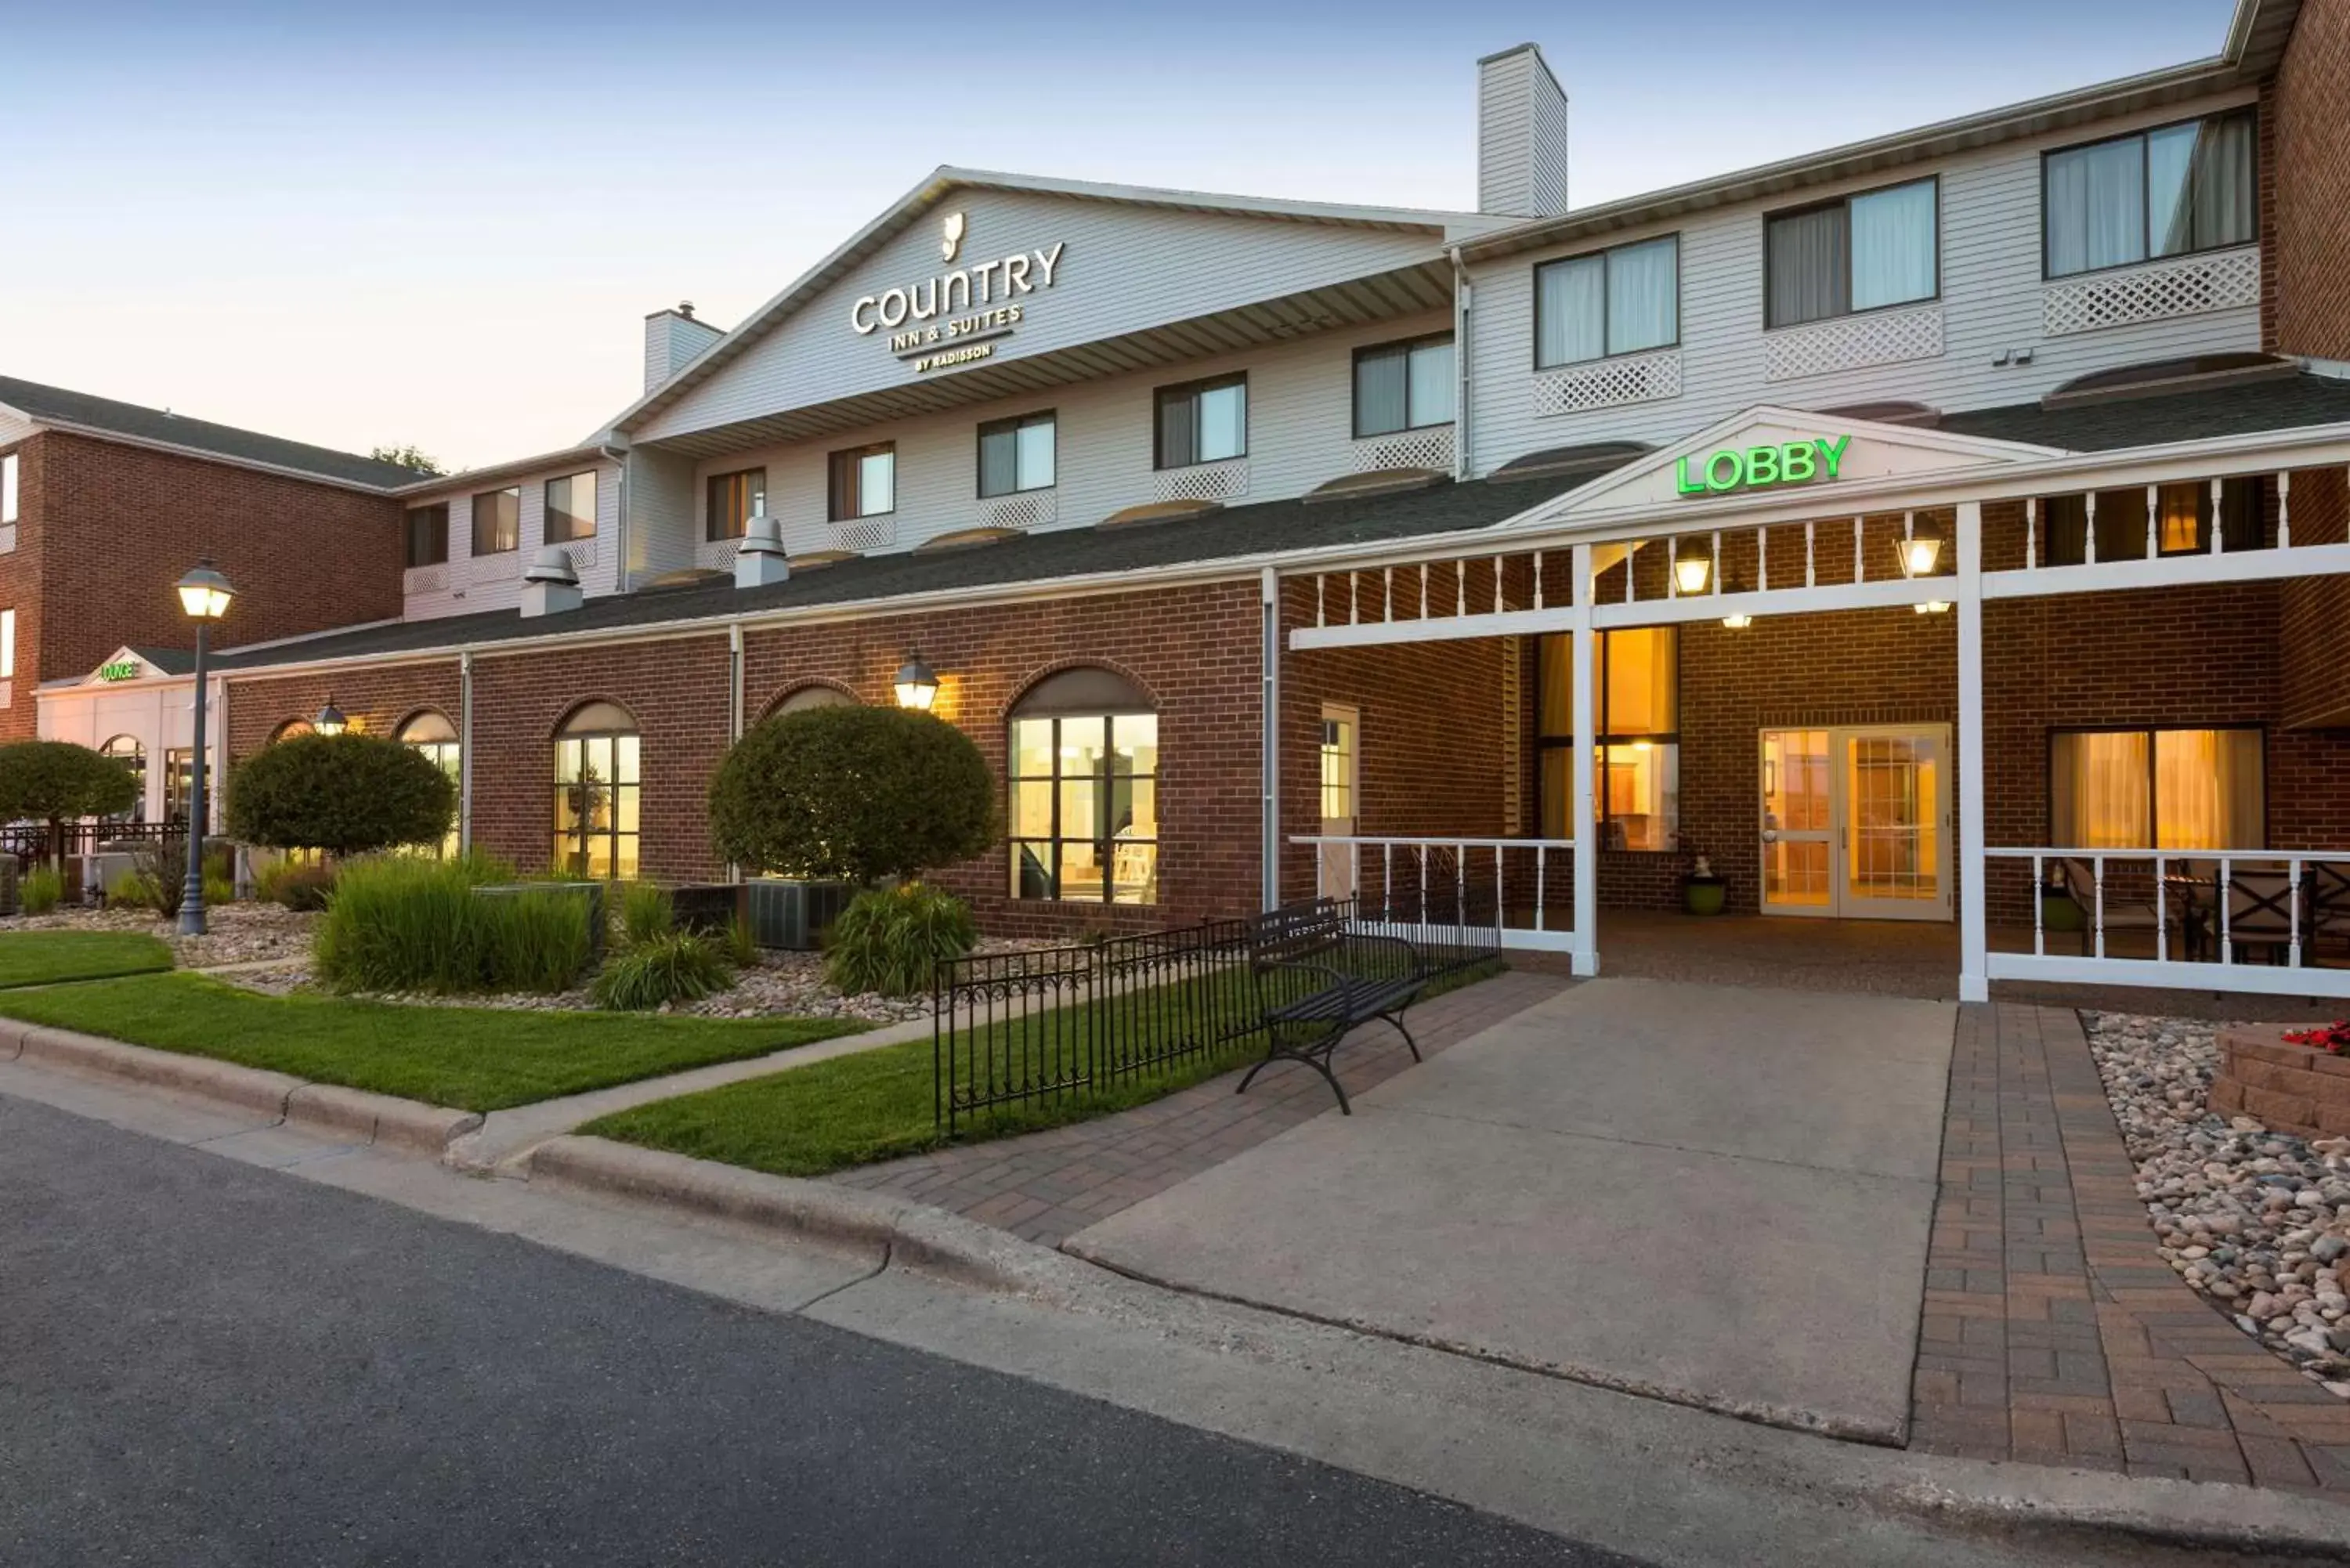 Property building in Country Inn & Suites by Radisson, Fargo, ND